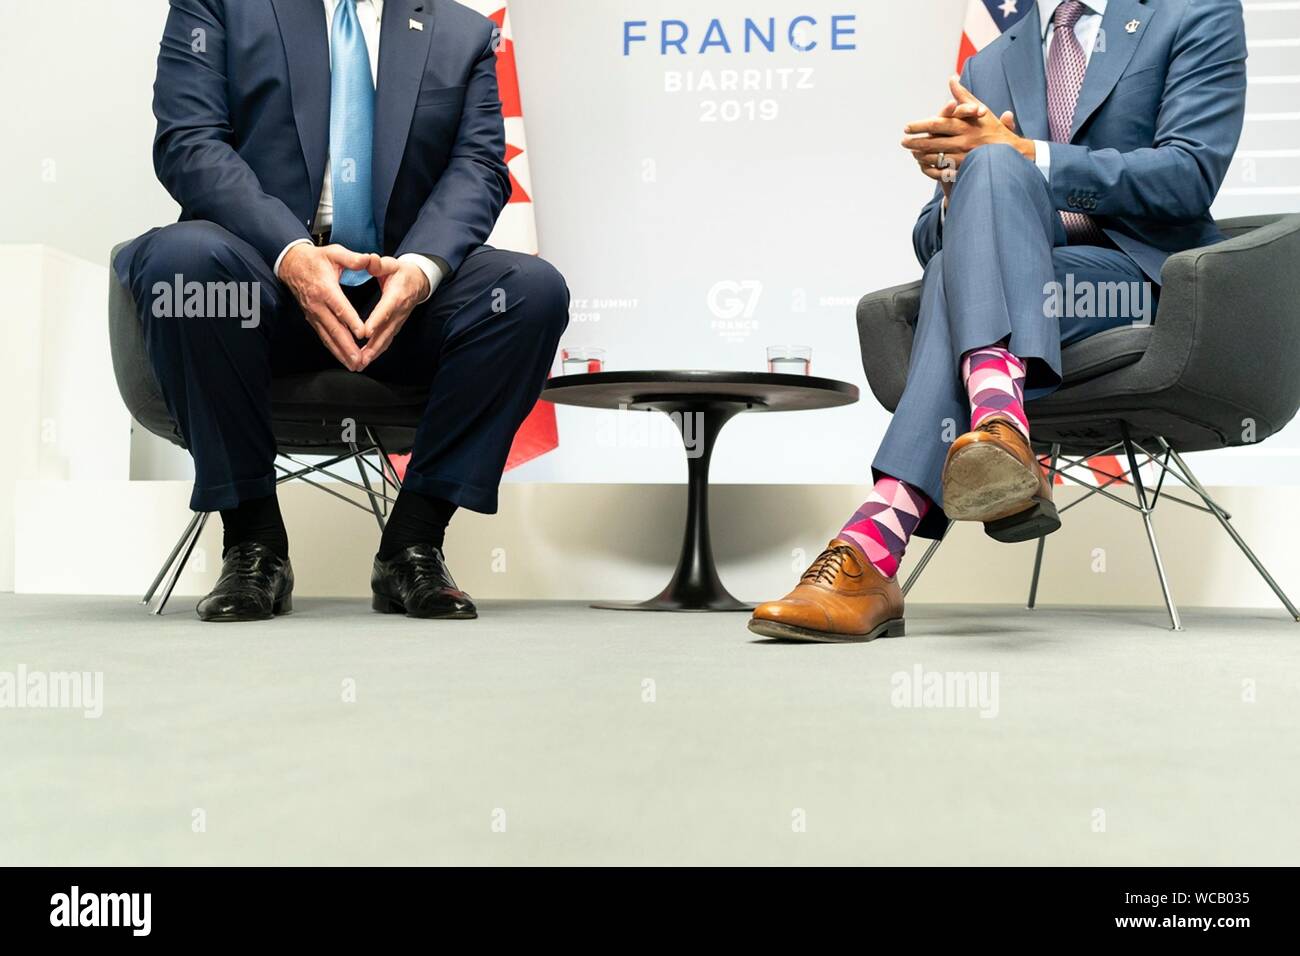 A contrast in style showing the colorful socks worn by Canadian Prime Minister Justin Trudeau, right, and those worn by U.S. President Donald Trump prior to their bilateral meeting on the sidelines of the G7 Summit at the Centre de Congrés Bellevue August 25, 2019 in Biarritz, France. Stock Photo